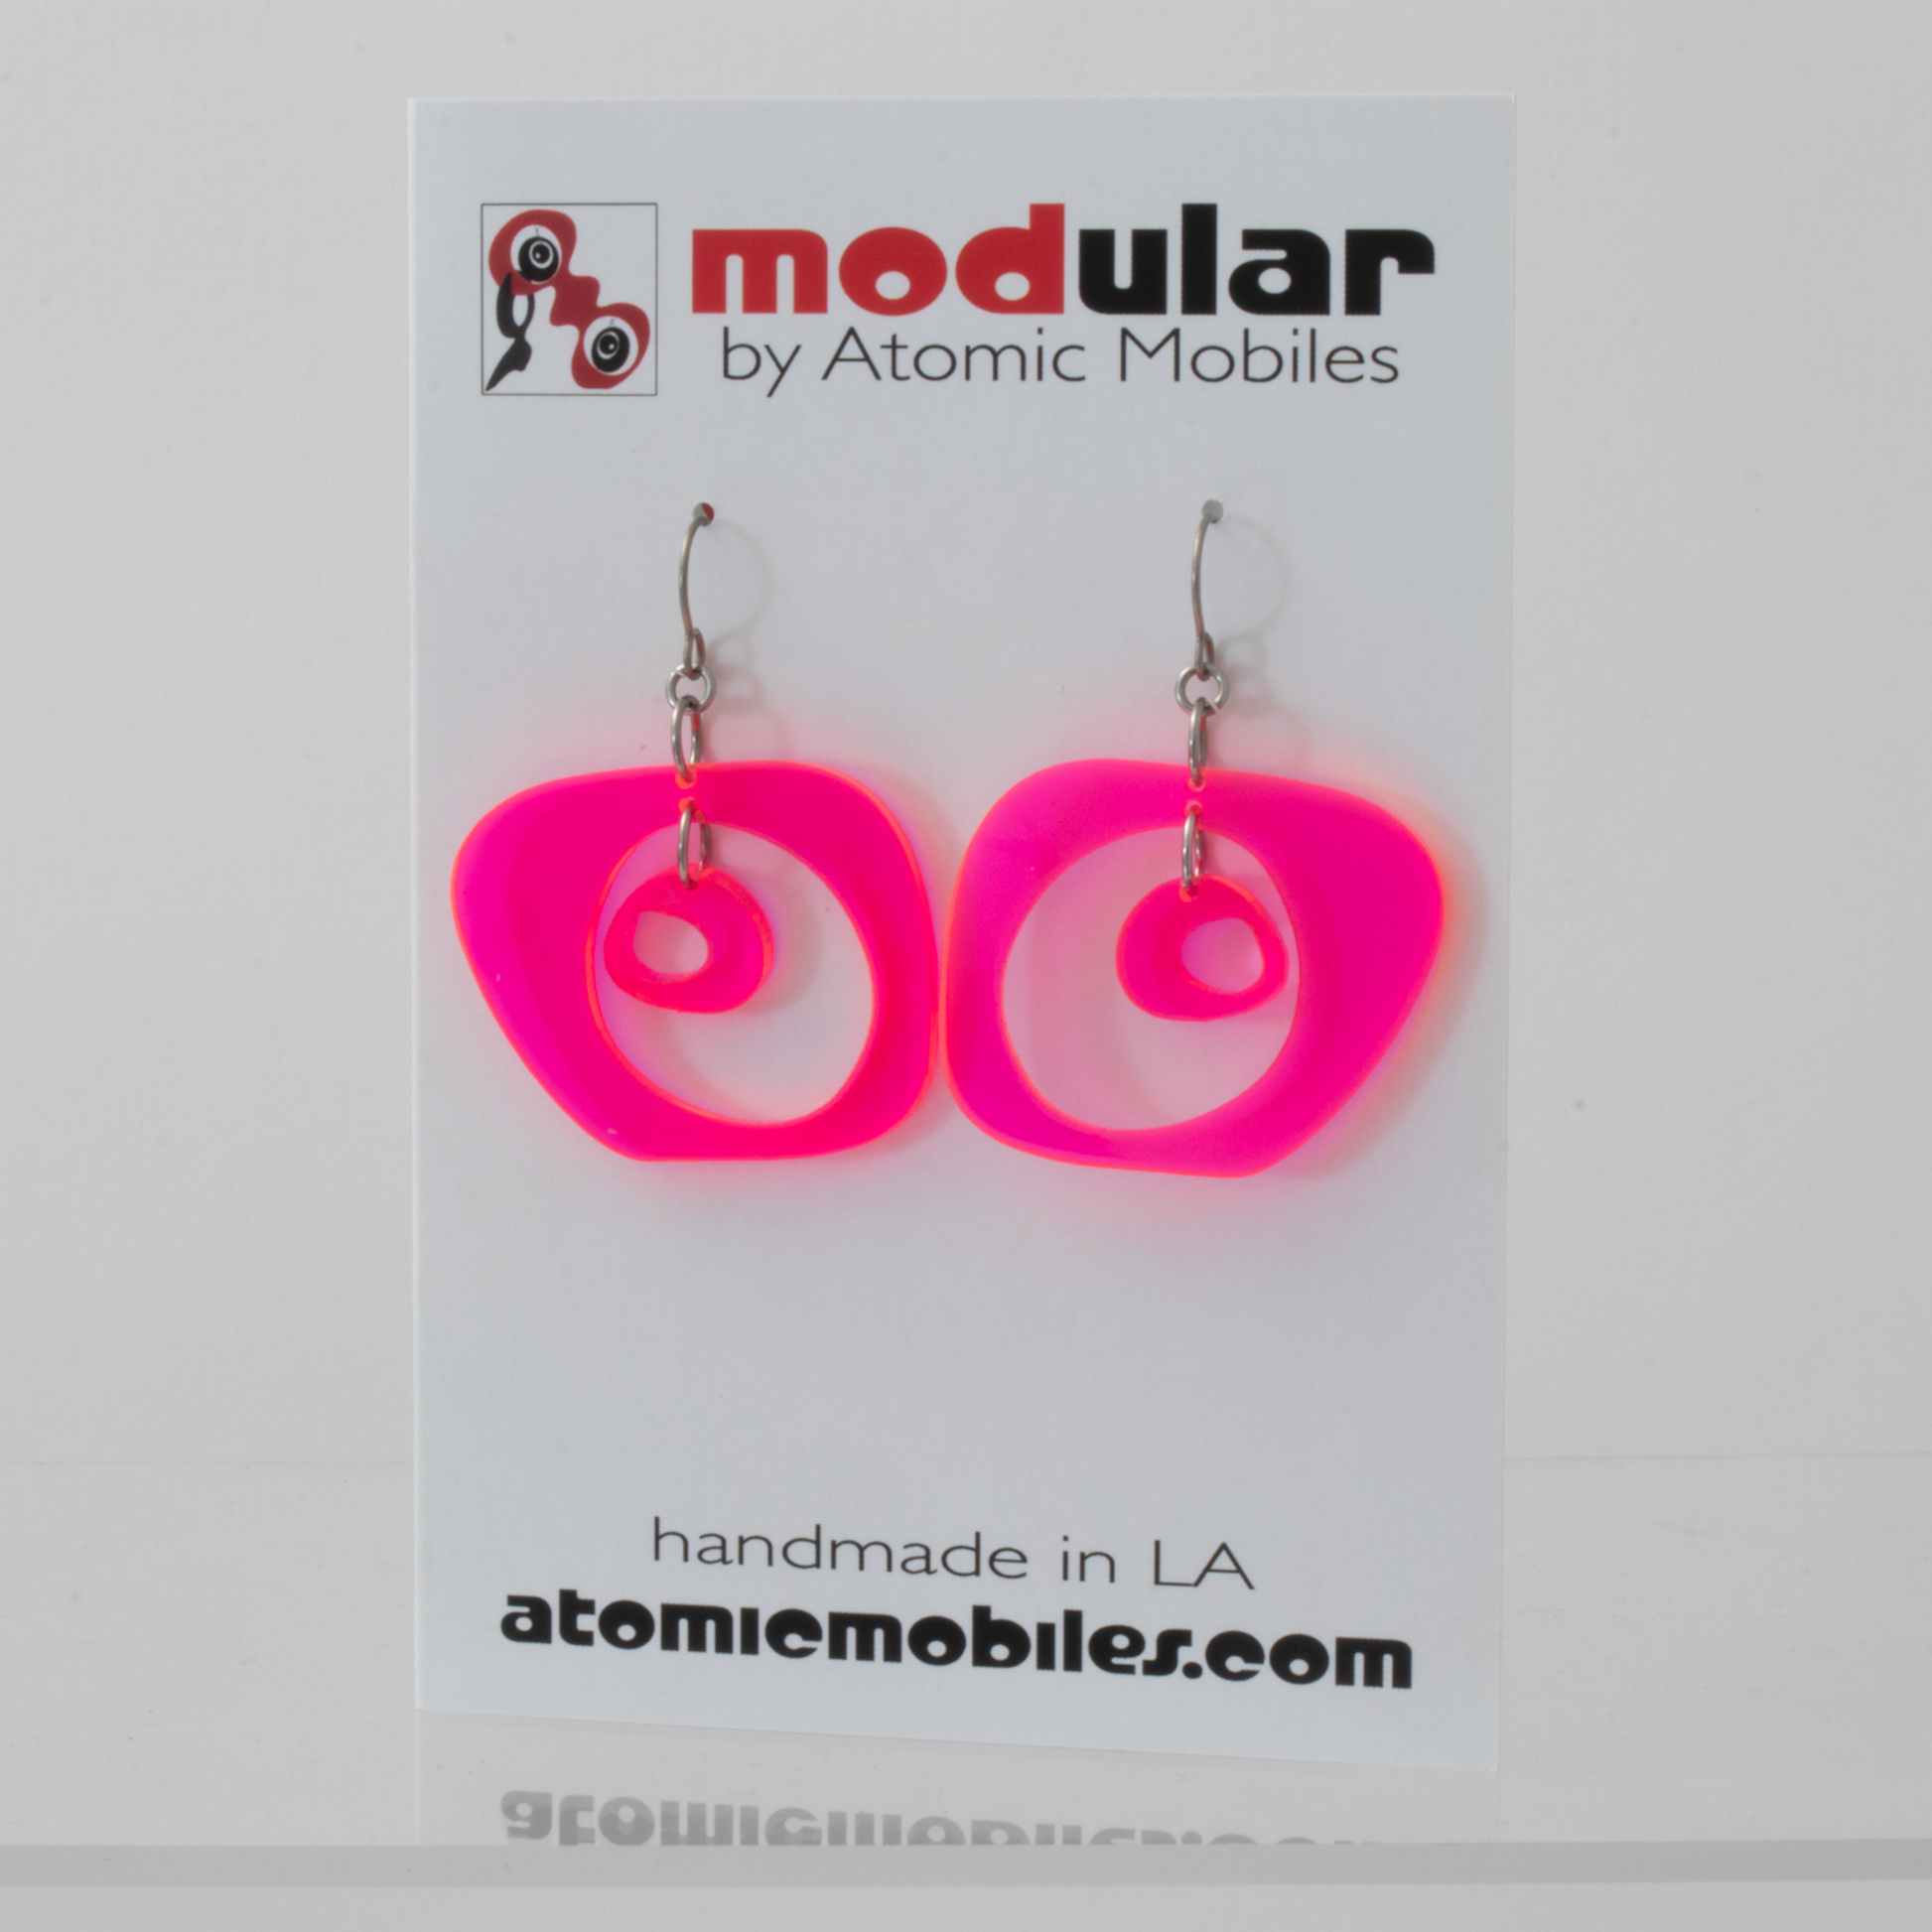 Paris 1960s Mid Century Modern Style Earrings in Neon Fluorescent Hot Pink plexiglass acrylic by AtomicMobiles.com